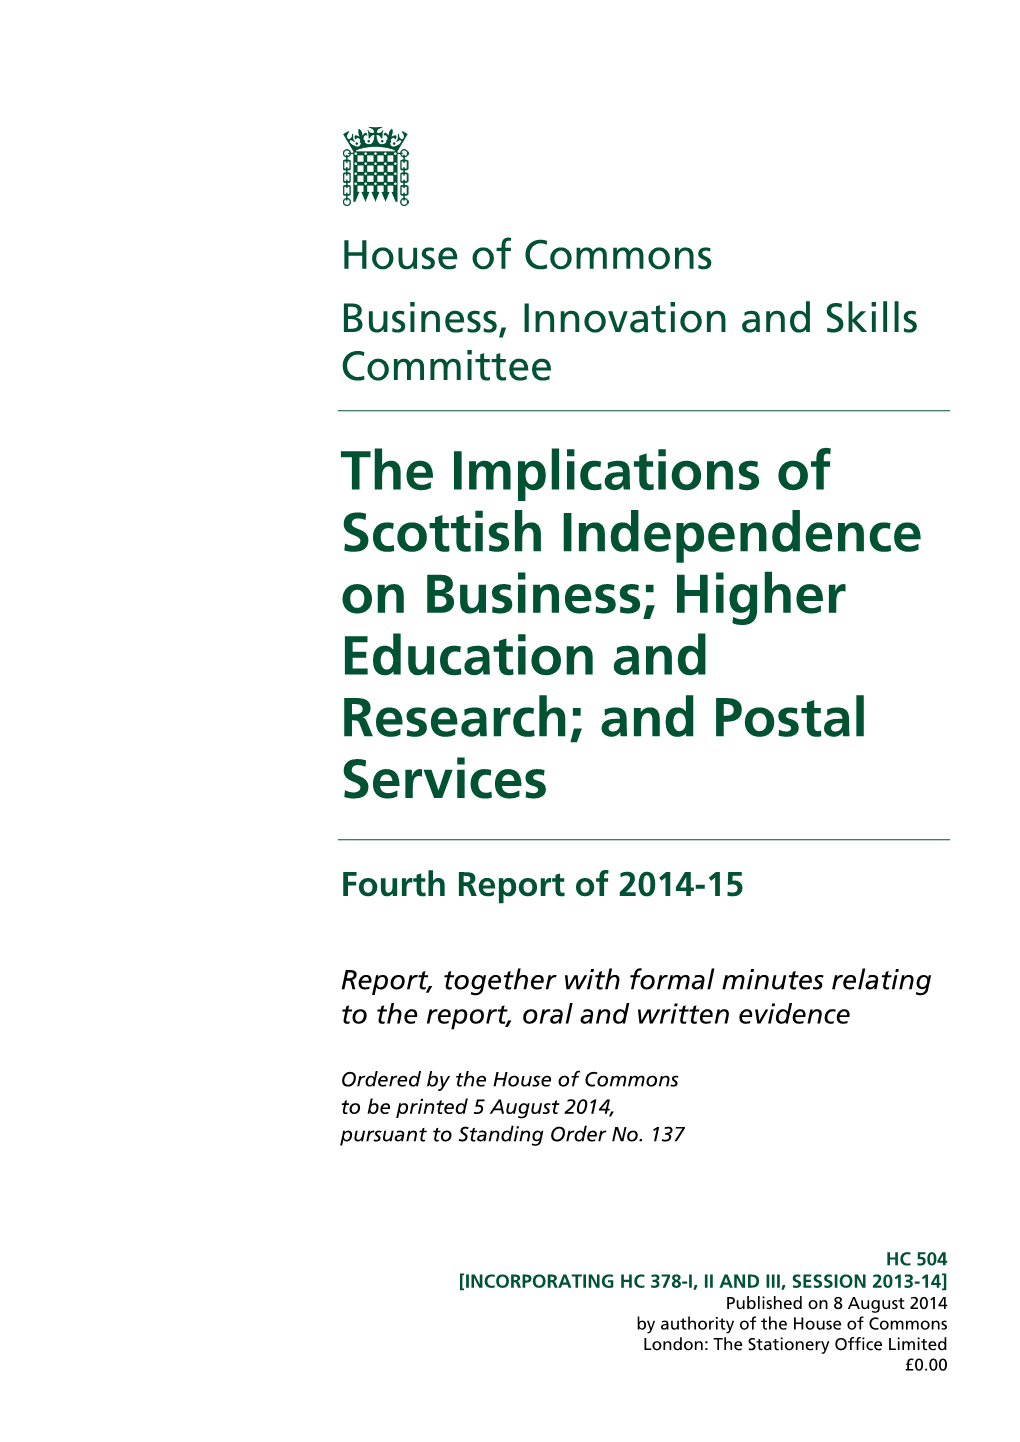 The Implications of Scottish Independence on Business; Higher Education and Research; and Postal Services